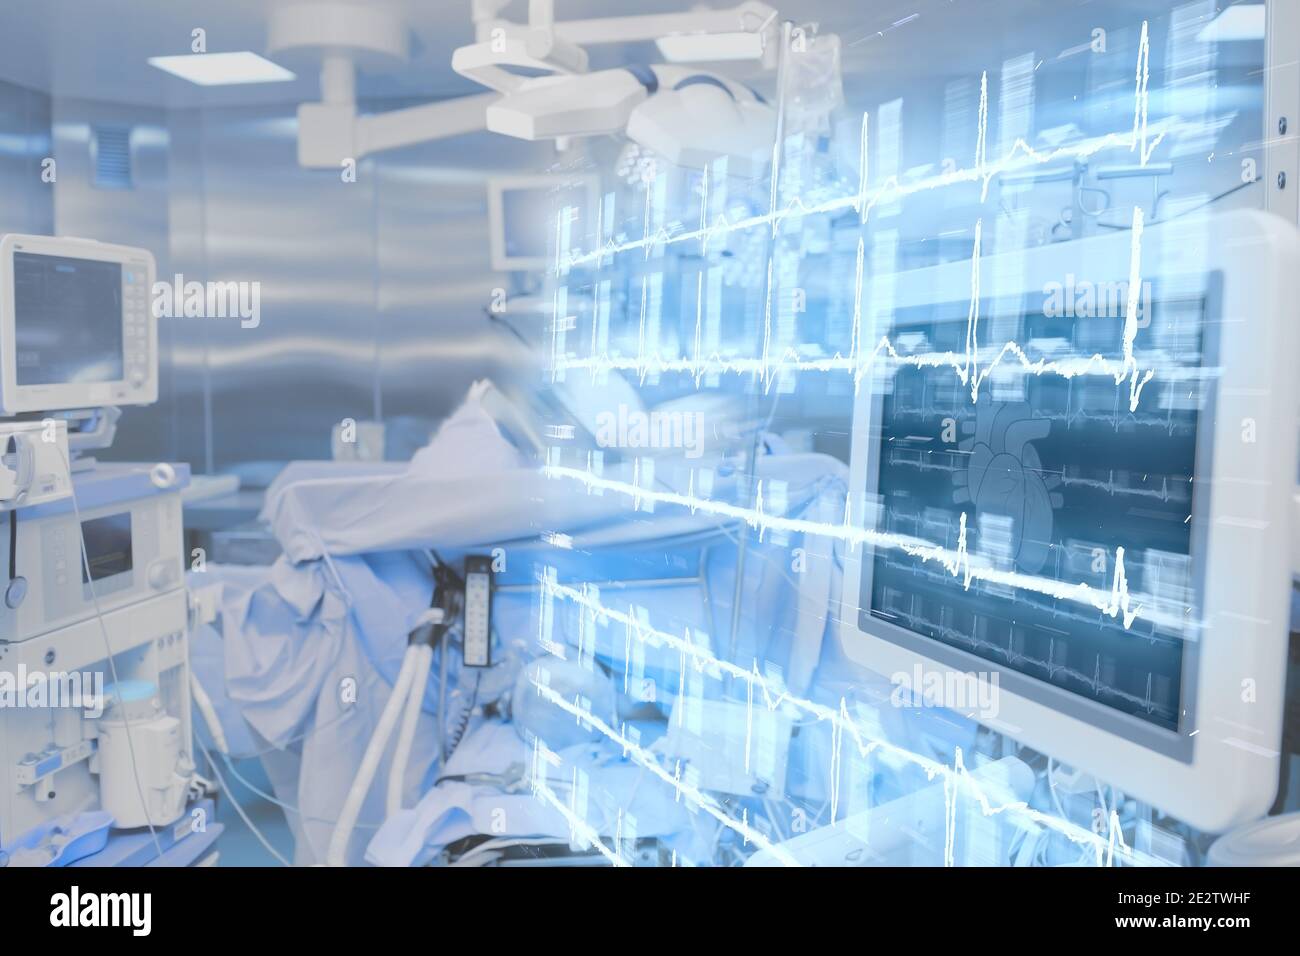 Modern technologies in hospital operating room. Stock Photo